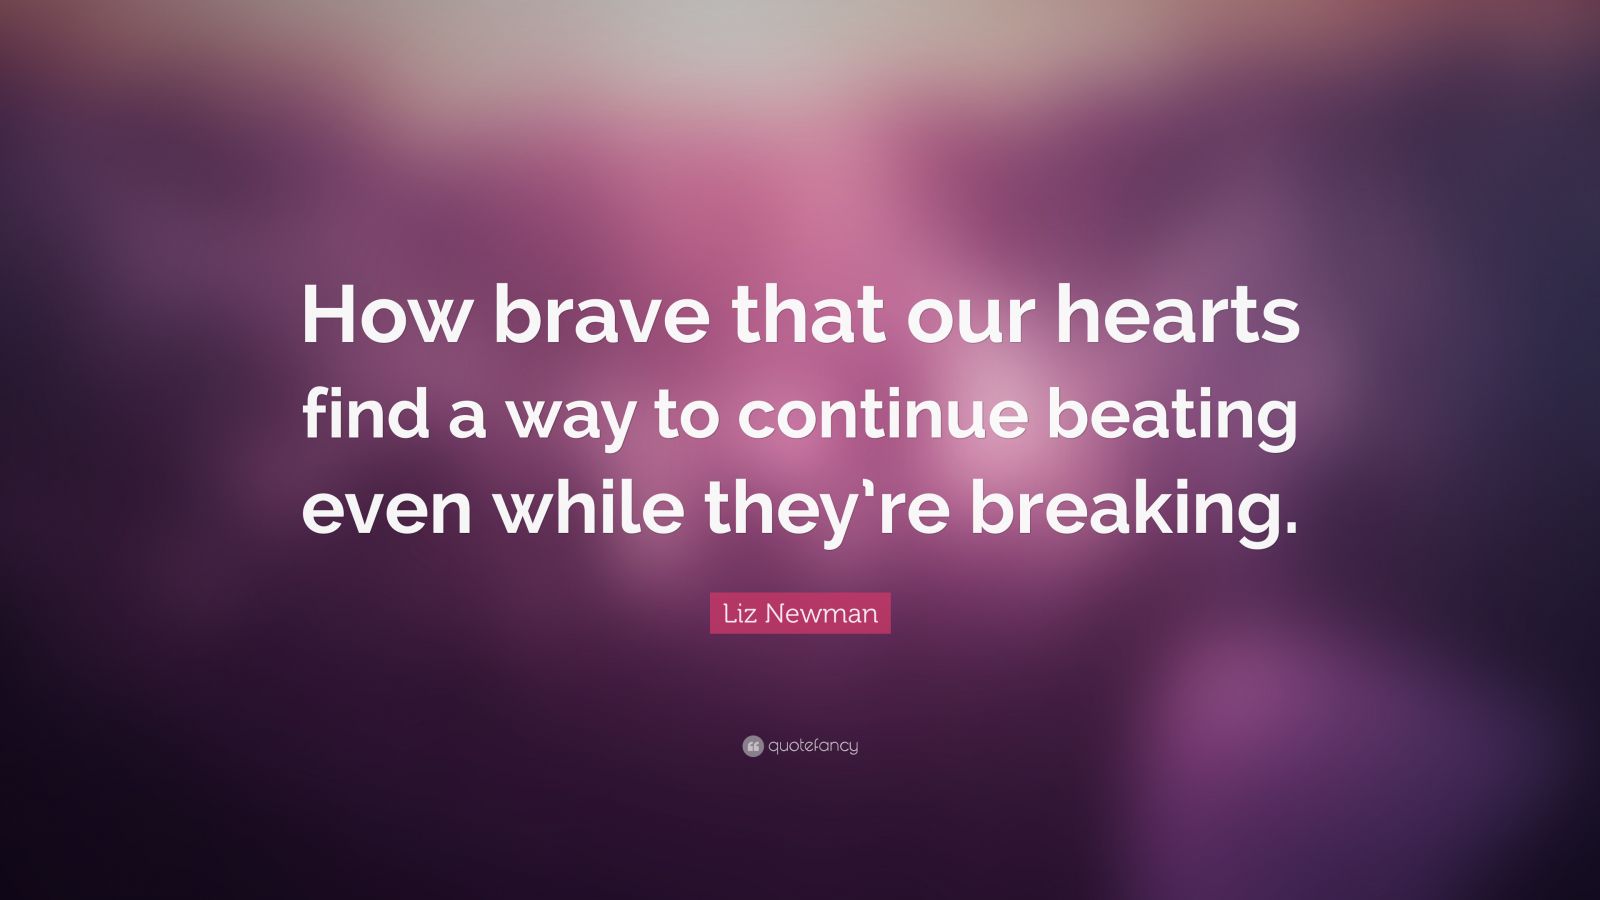 Liz Newman Quote: “How brave that our hearts find a way to continue ...